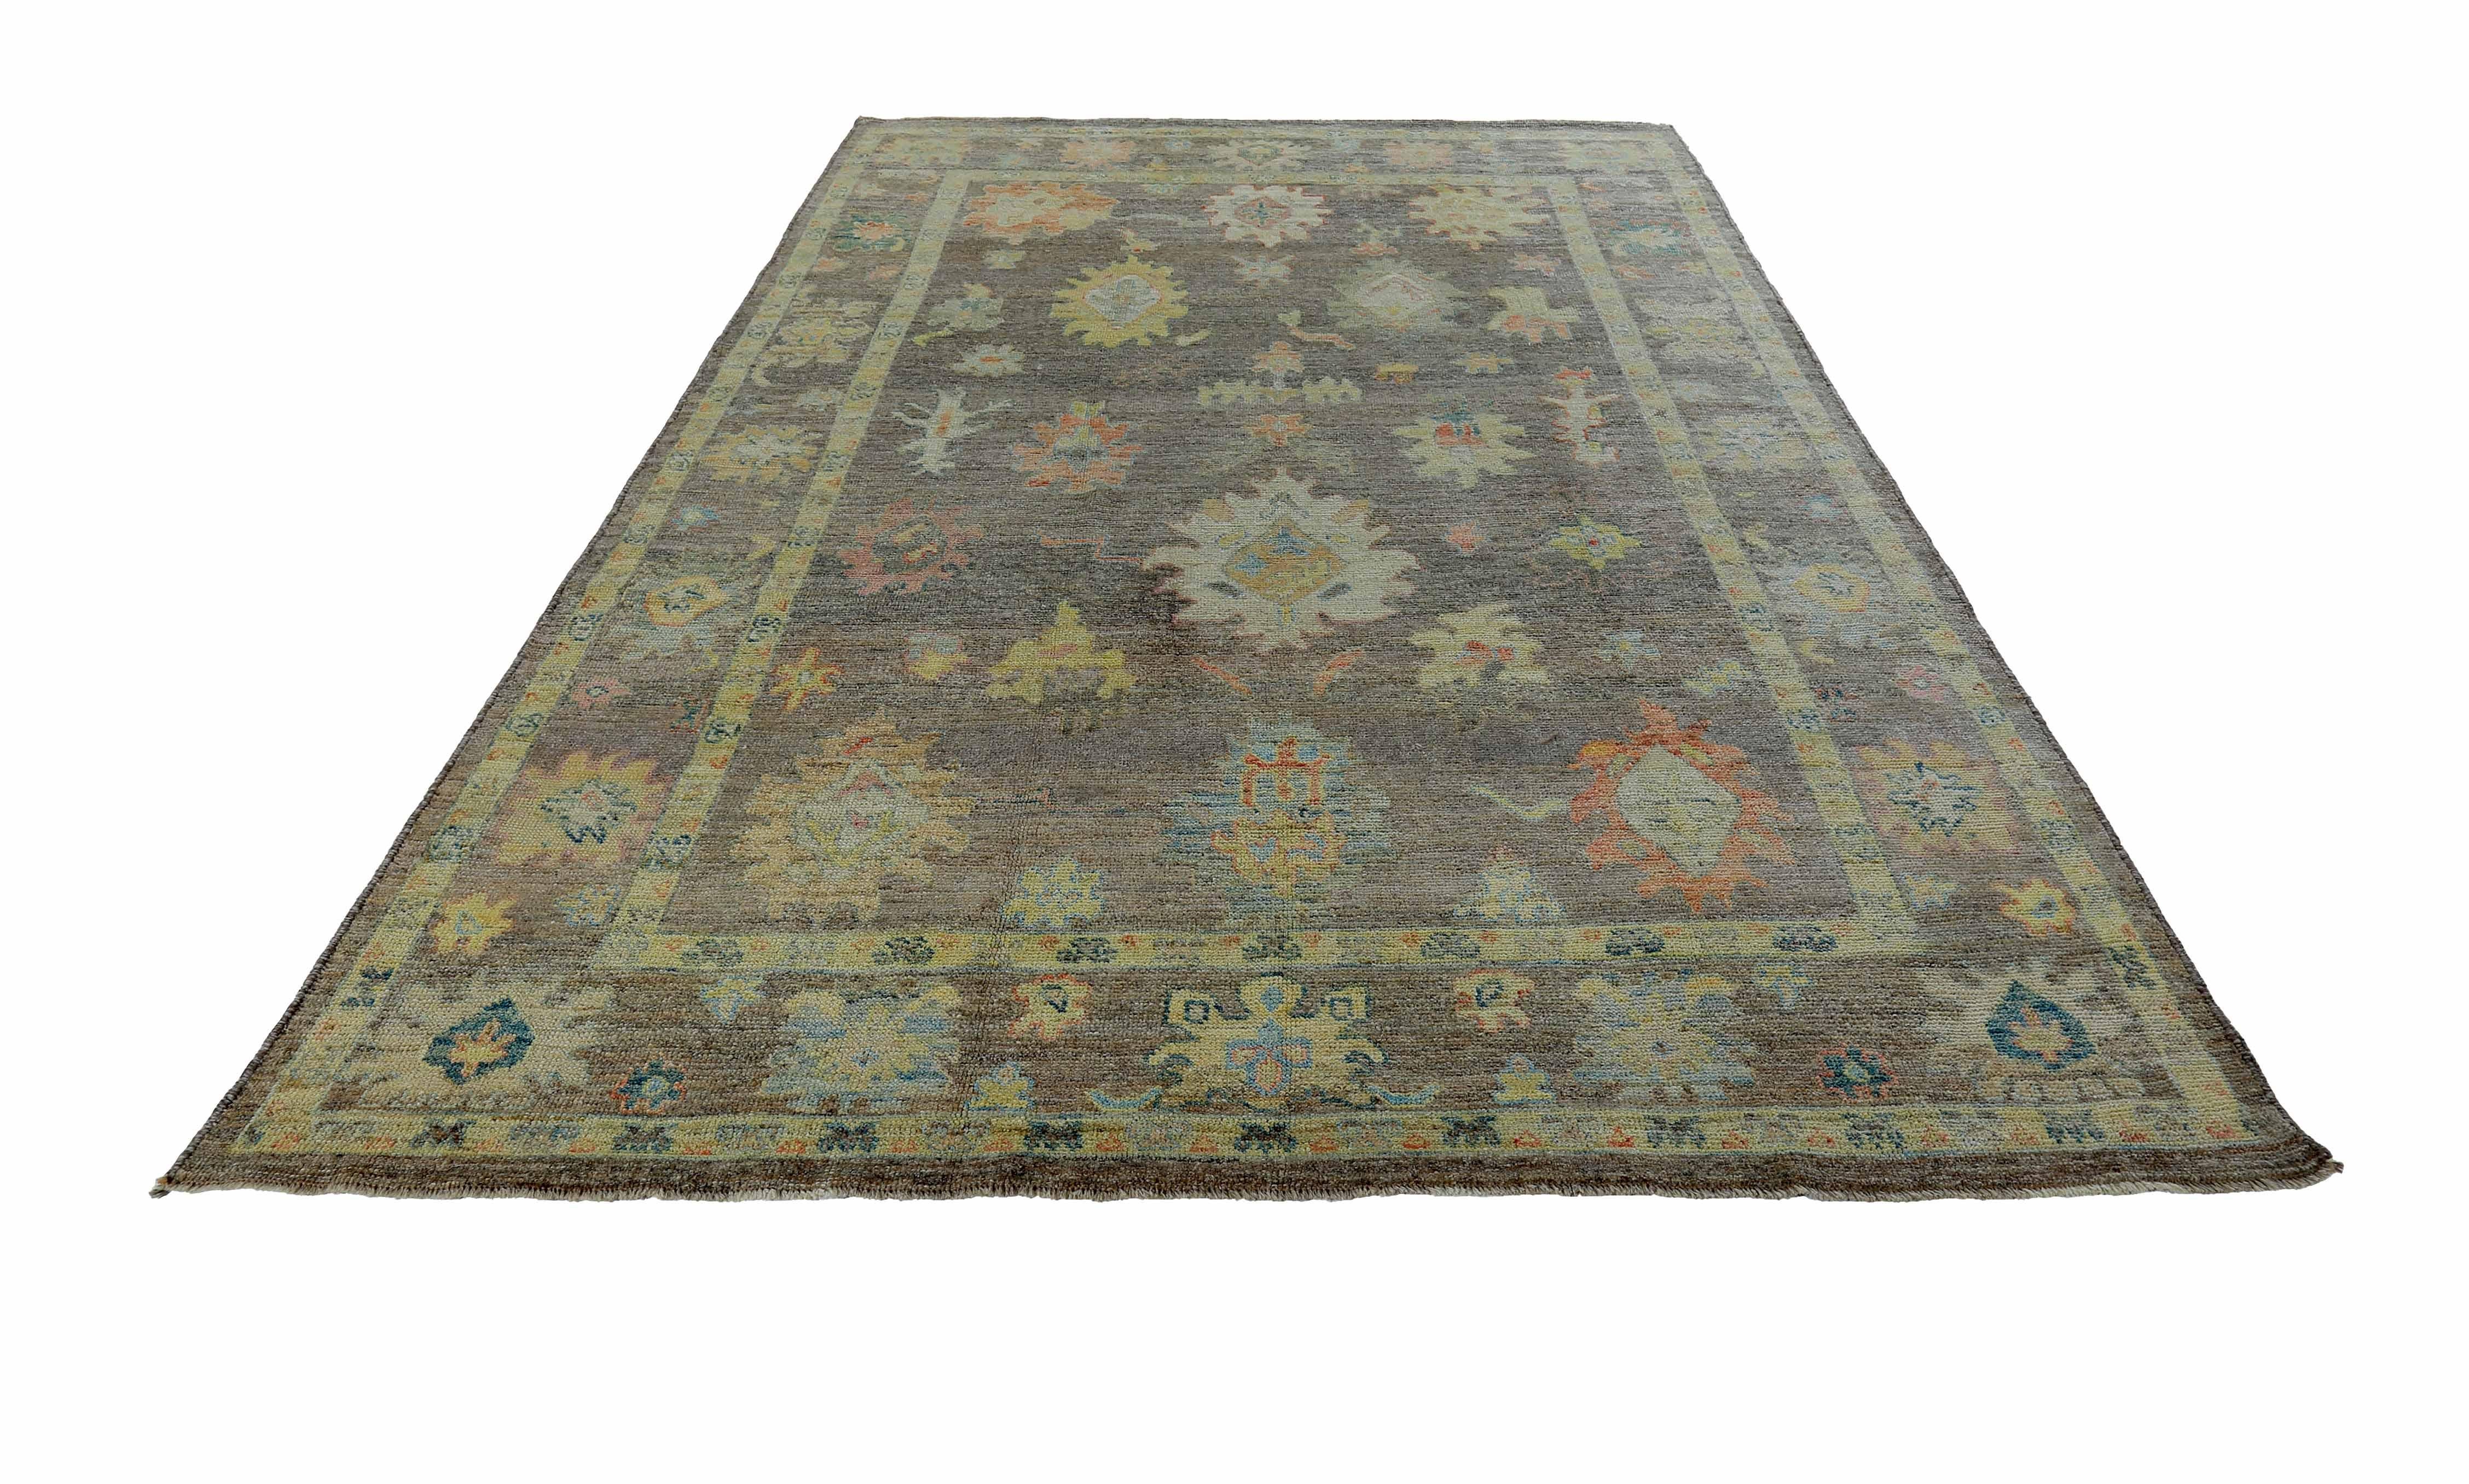 New Turkish rug made of handwoven sheep’s wool of the finest quality. It’s colored with organic vegetable dyes that are certified safe for humans and pets alike. It features bright colored flower heads adorning a rich brown field. Flower patterns